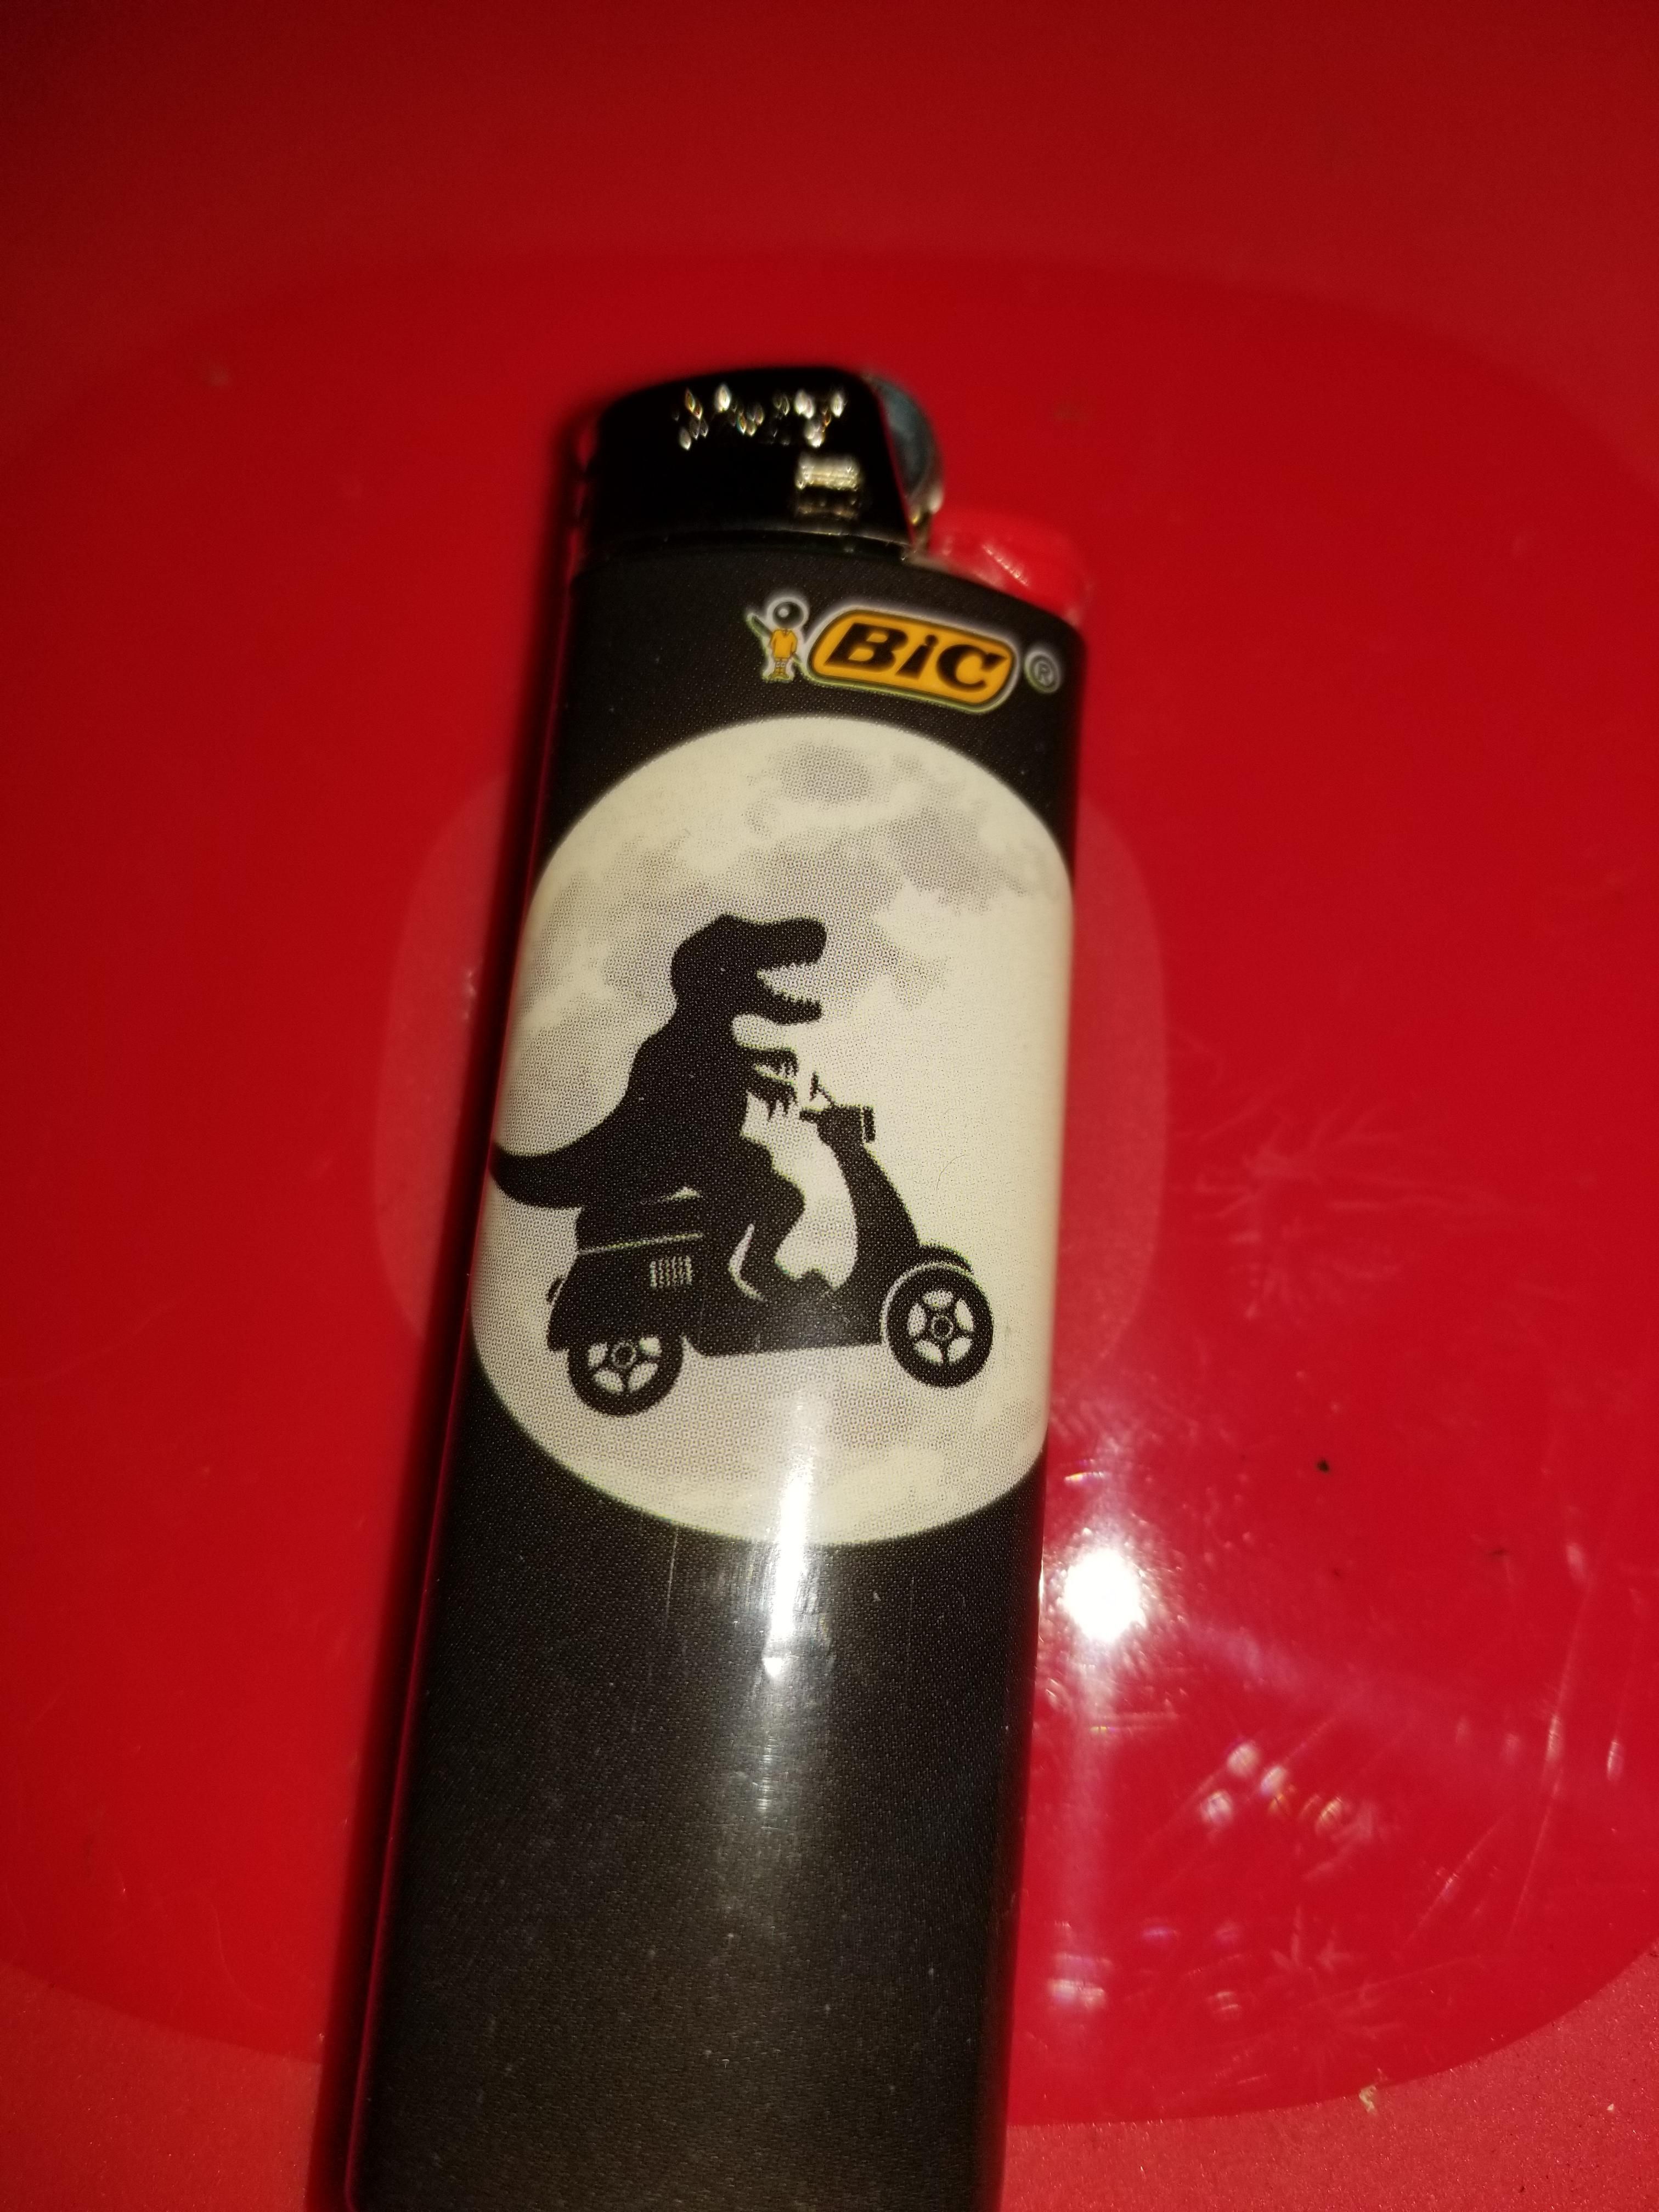 Clerk rang up a random BIC lighter. I saw it and died. All I could think was, "Wheeeee!"